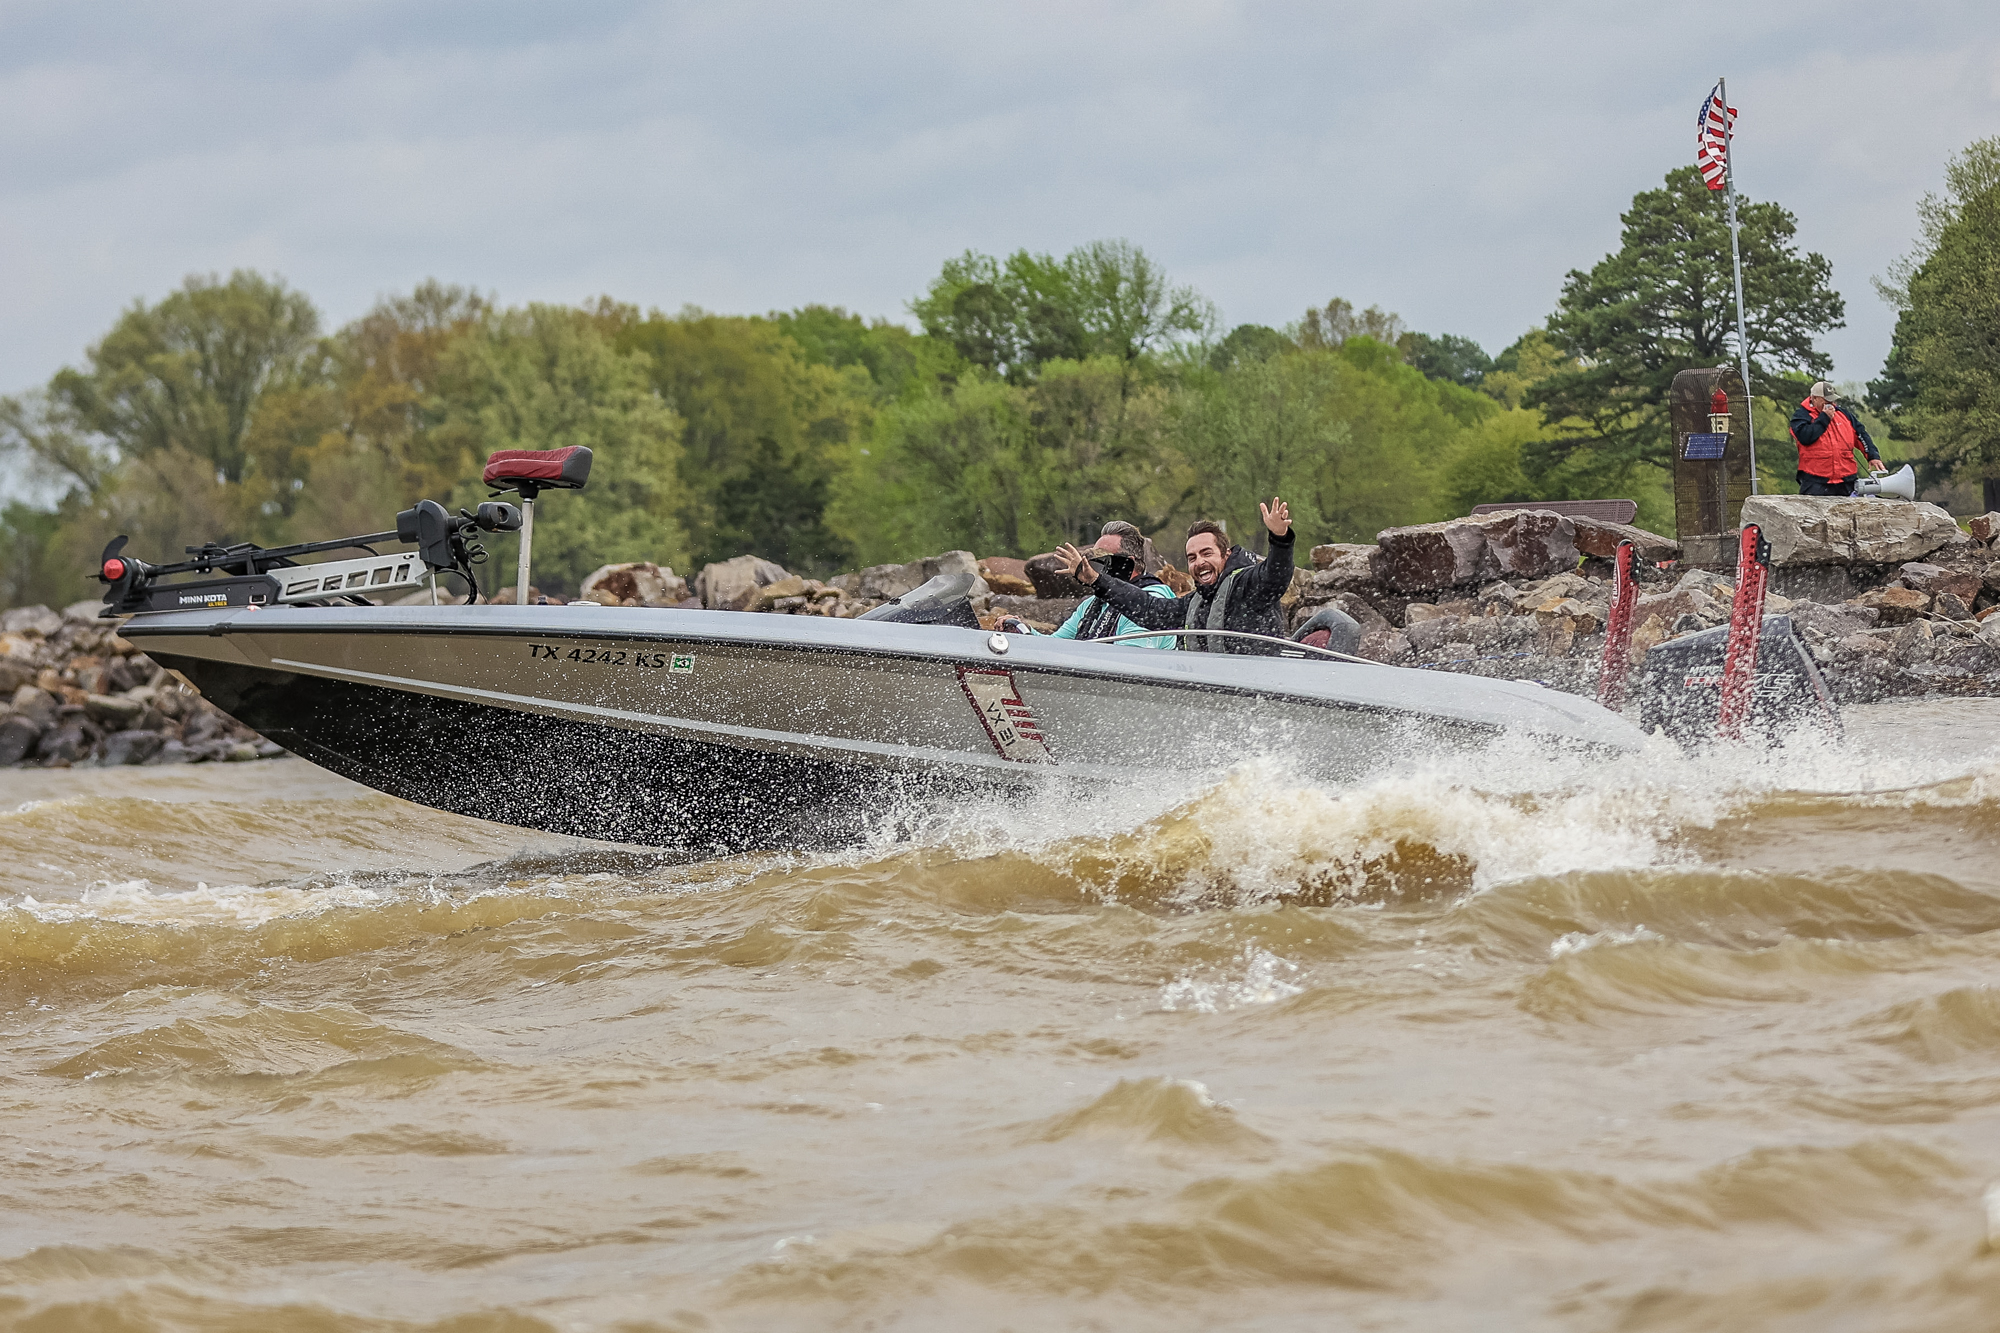 GALLERY: Weather change greets Toyota Series anglers on Day 2 at Dardanelle  - Major League Fishing